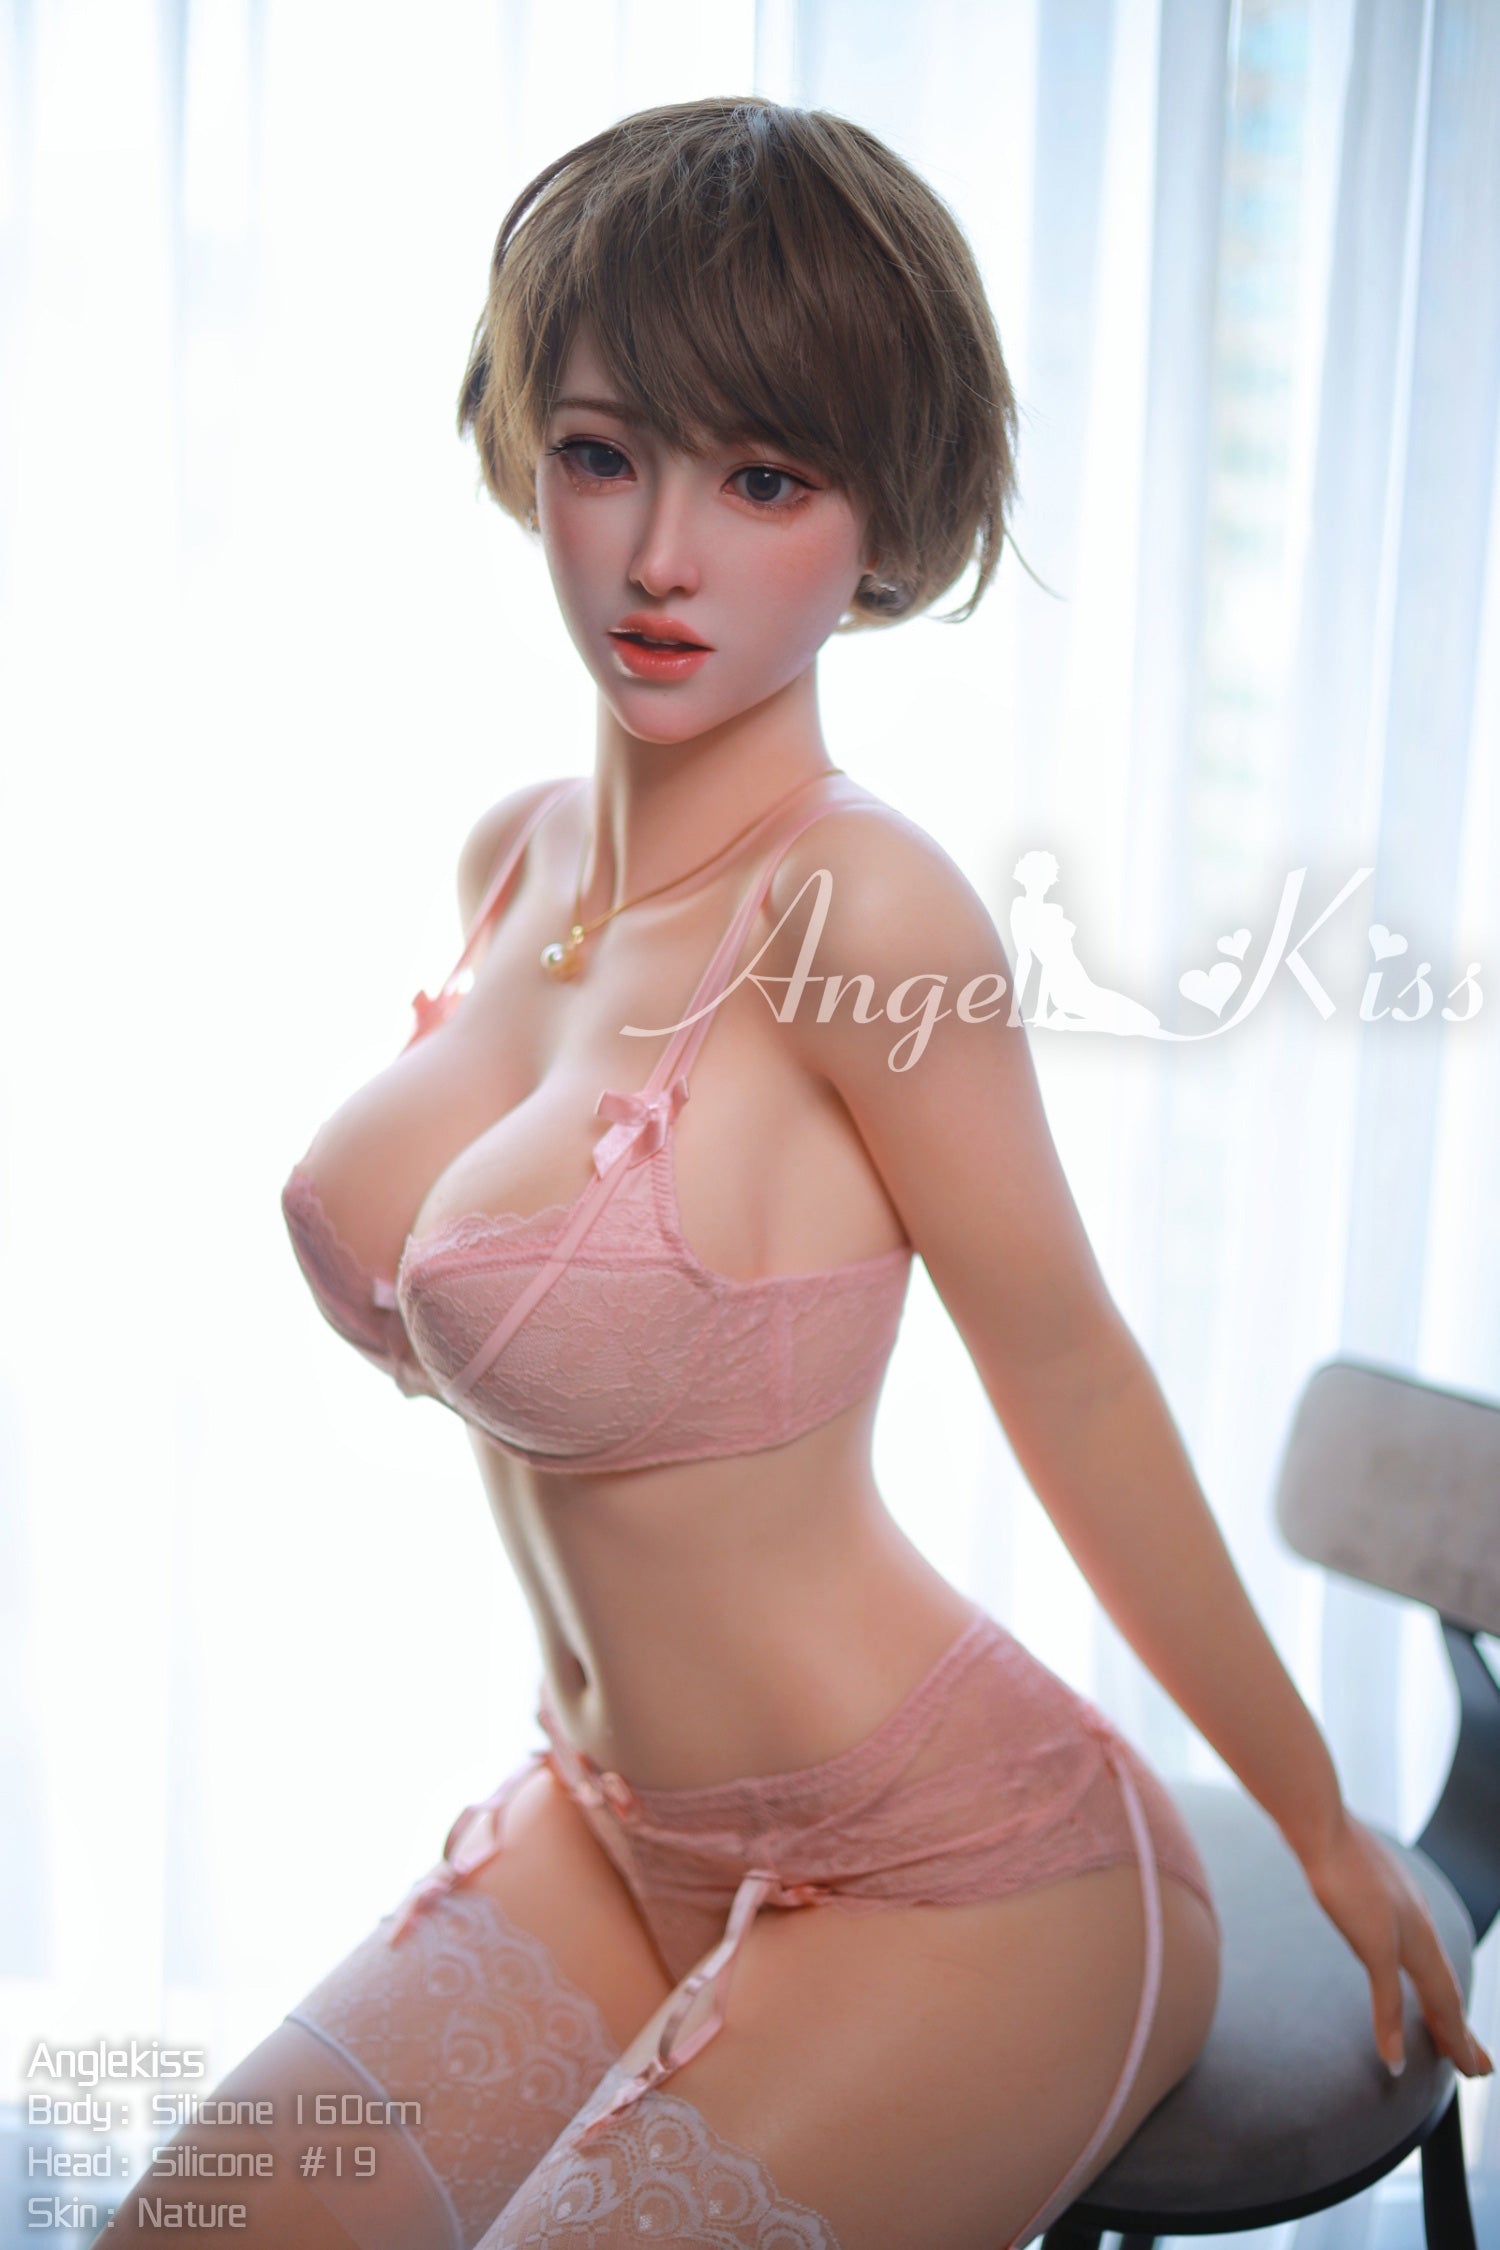 Angelkiss Doll 160 cm Silicone - Xiao | Buy Sex Dolls at DOLLS ACTUALLY